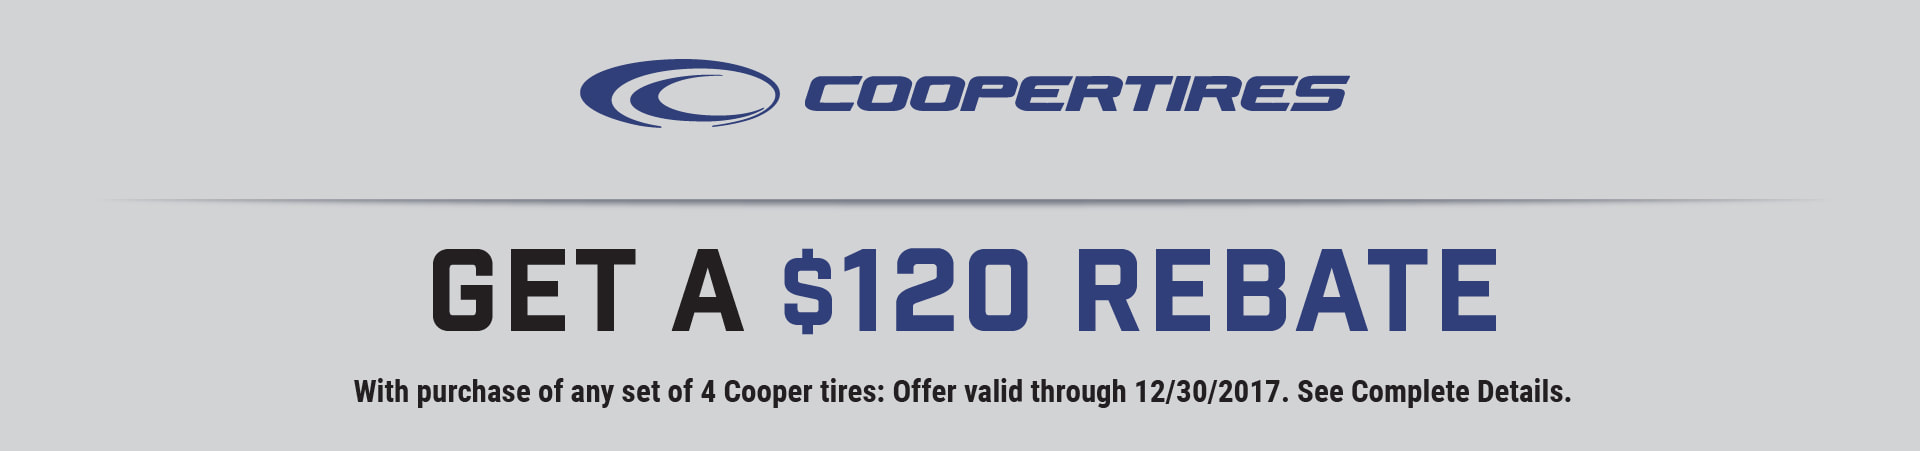 top-5-cooper-tire-rebate-form-templates-free-to-download-in-pdf-format